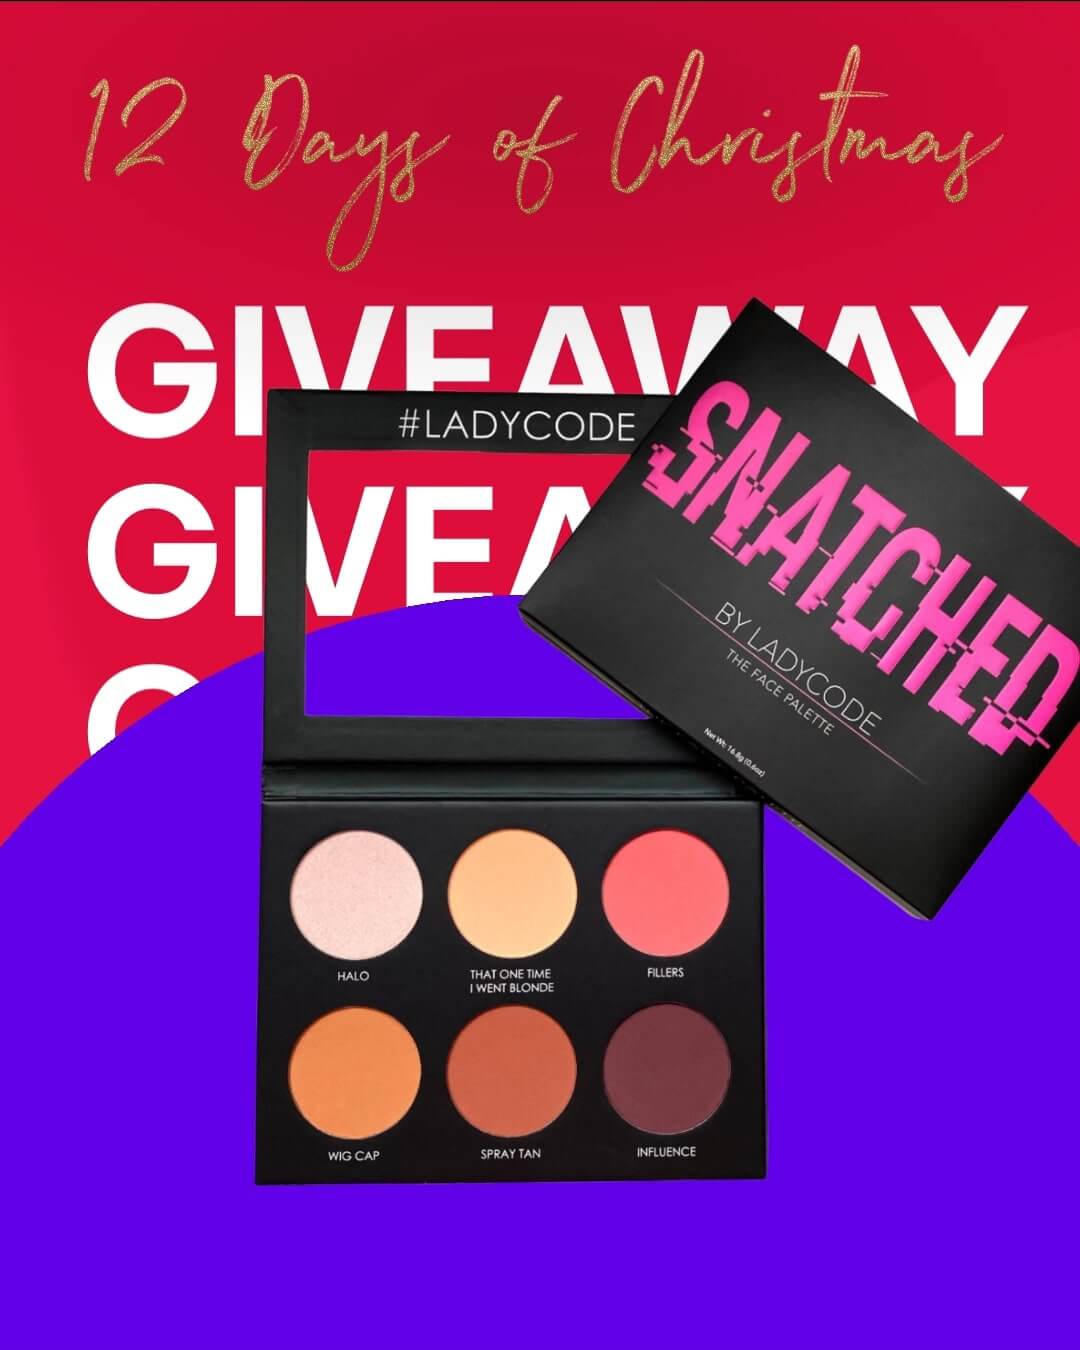 What you can win: Snatched Palette from LadyCode Shop